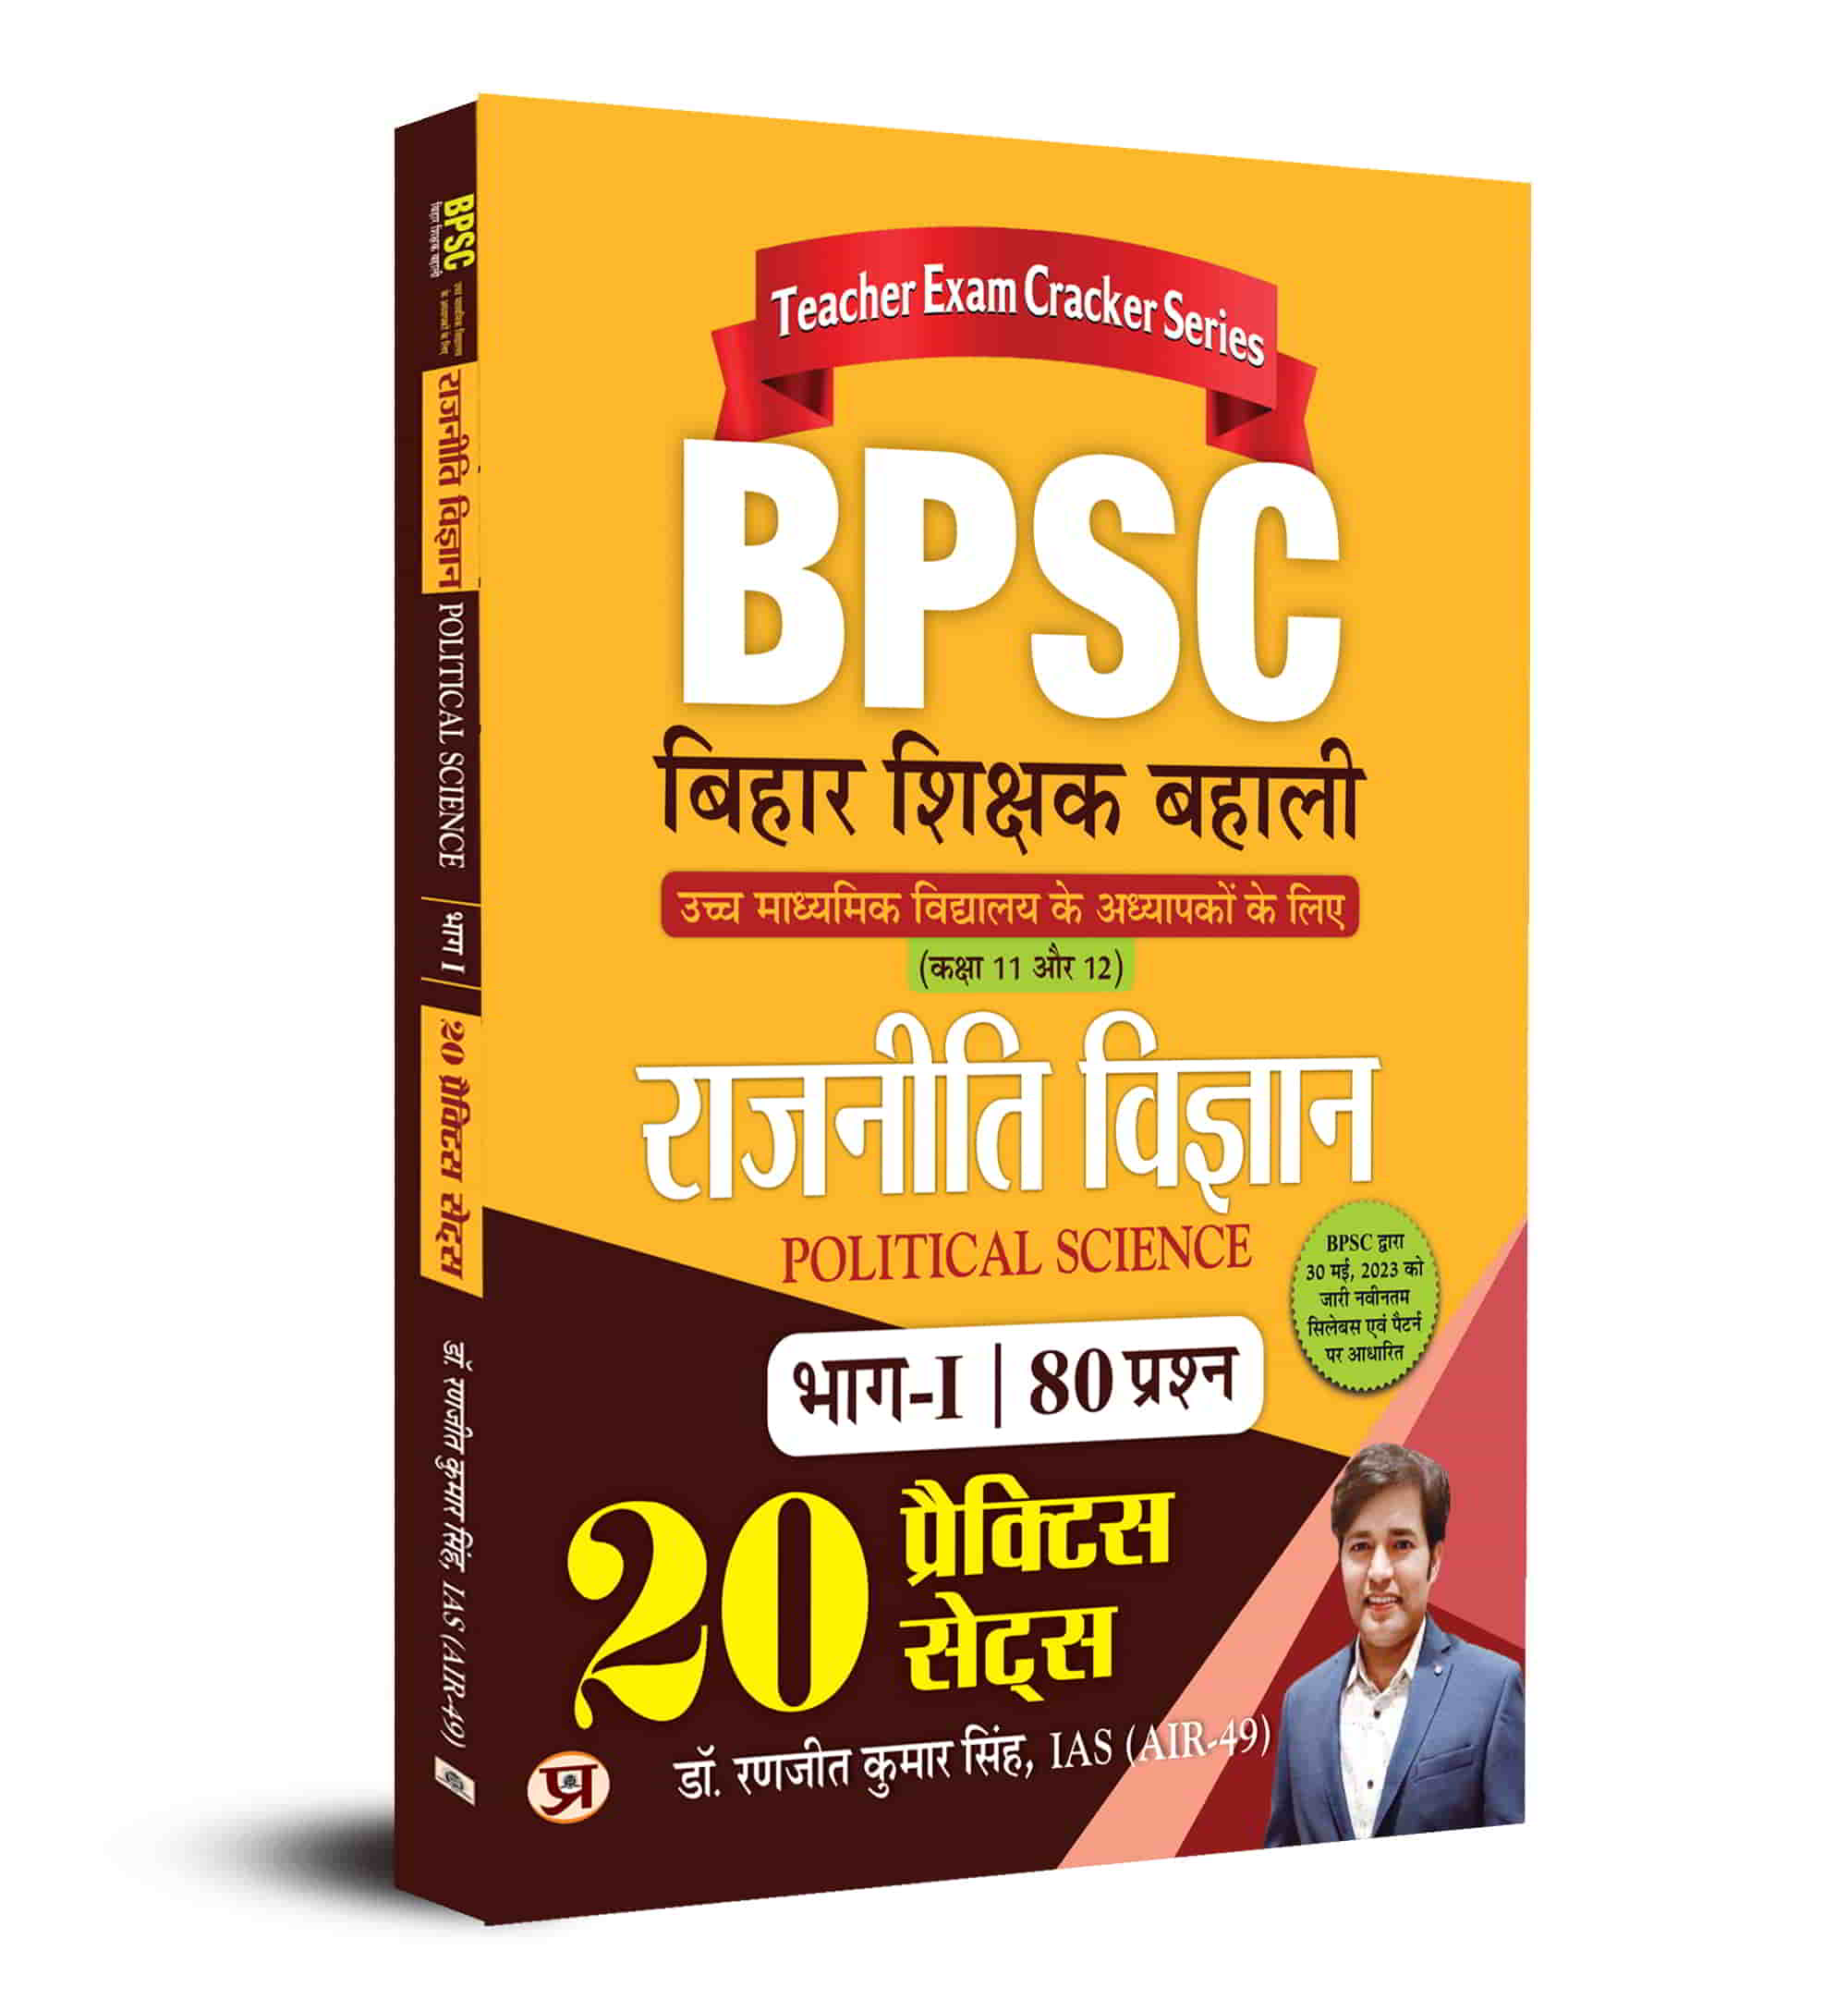 Bihar Public Service Commission Restoration Recruitment Geography 20 Practice Sets Book in Hindi